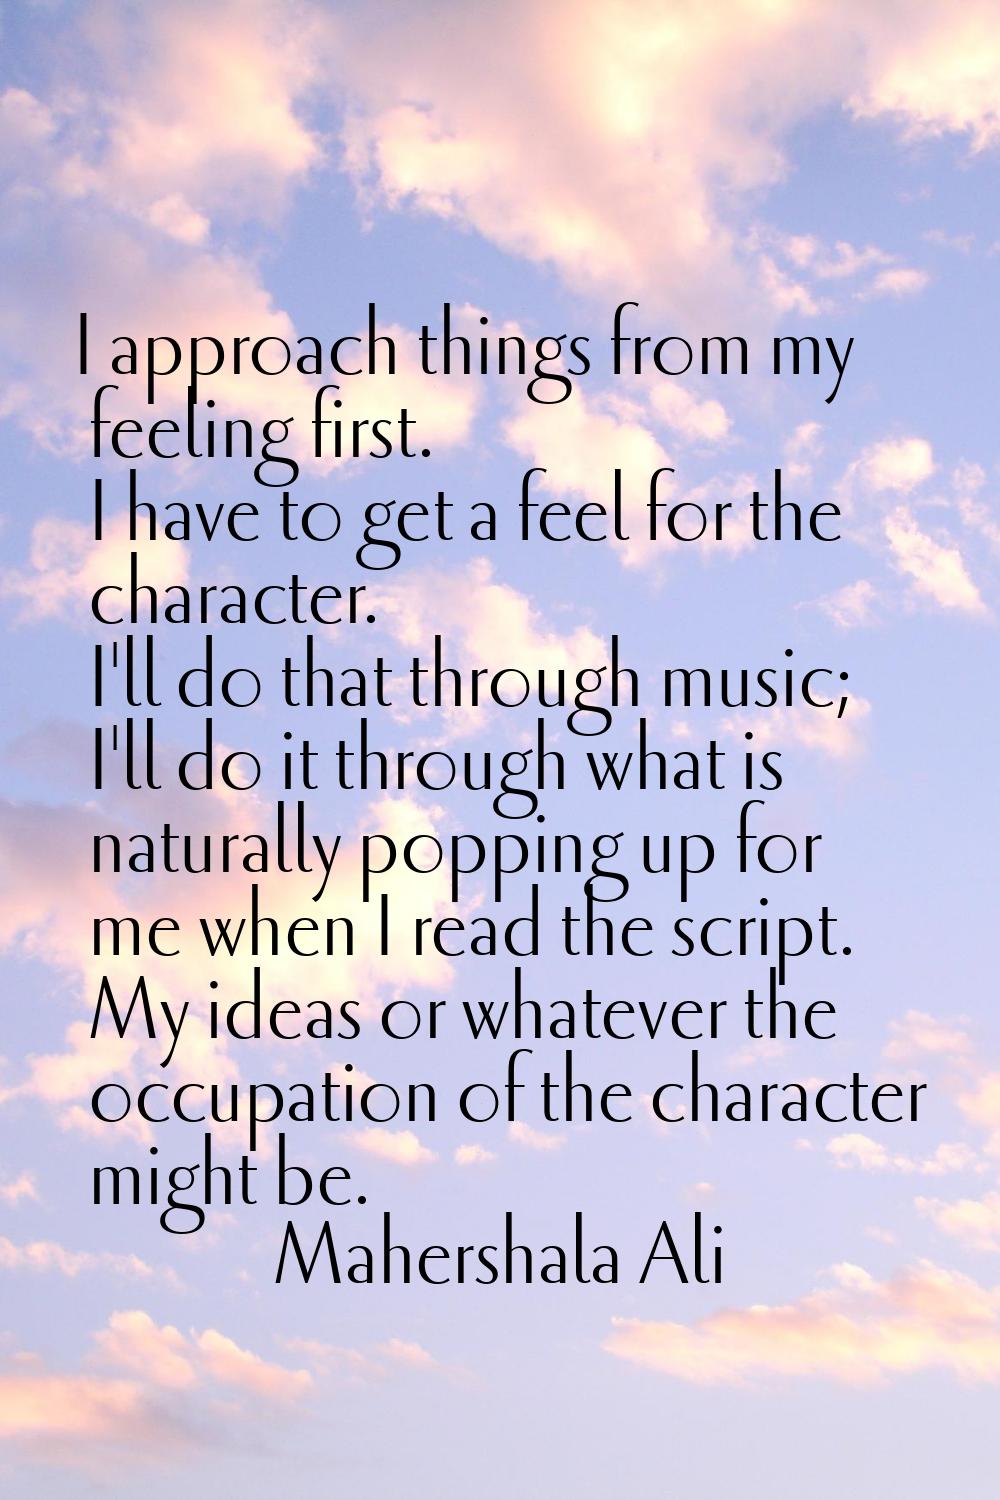 I approach things from my feeling first. I have to get a feel for the character. I'll do that throu